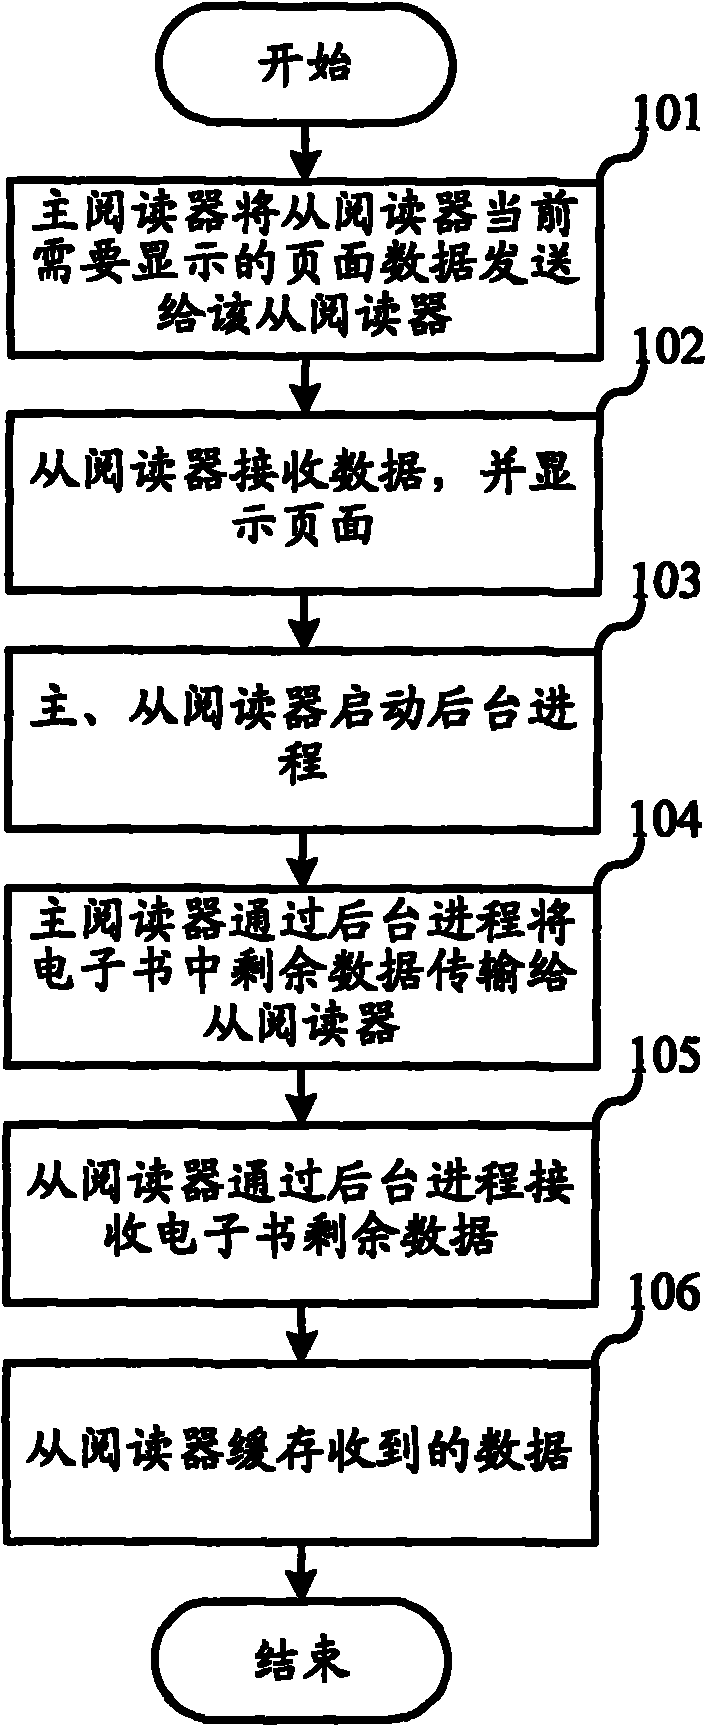 Method for transmitting data of shared electronic book among readers